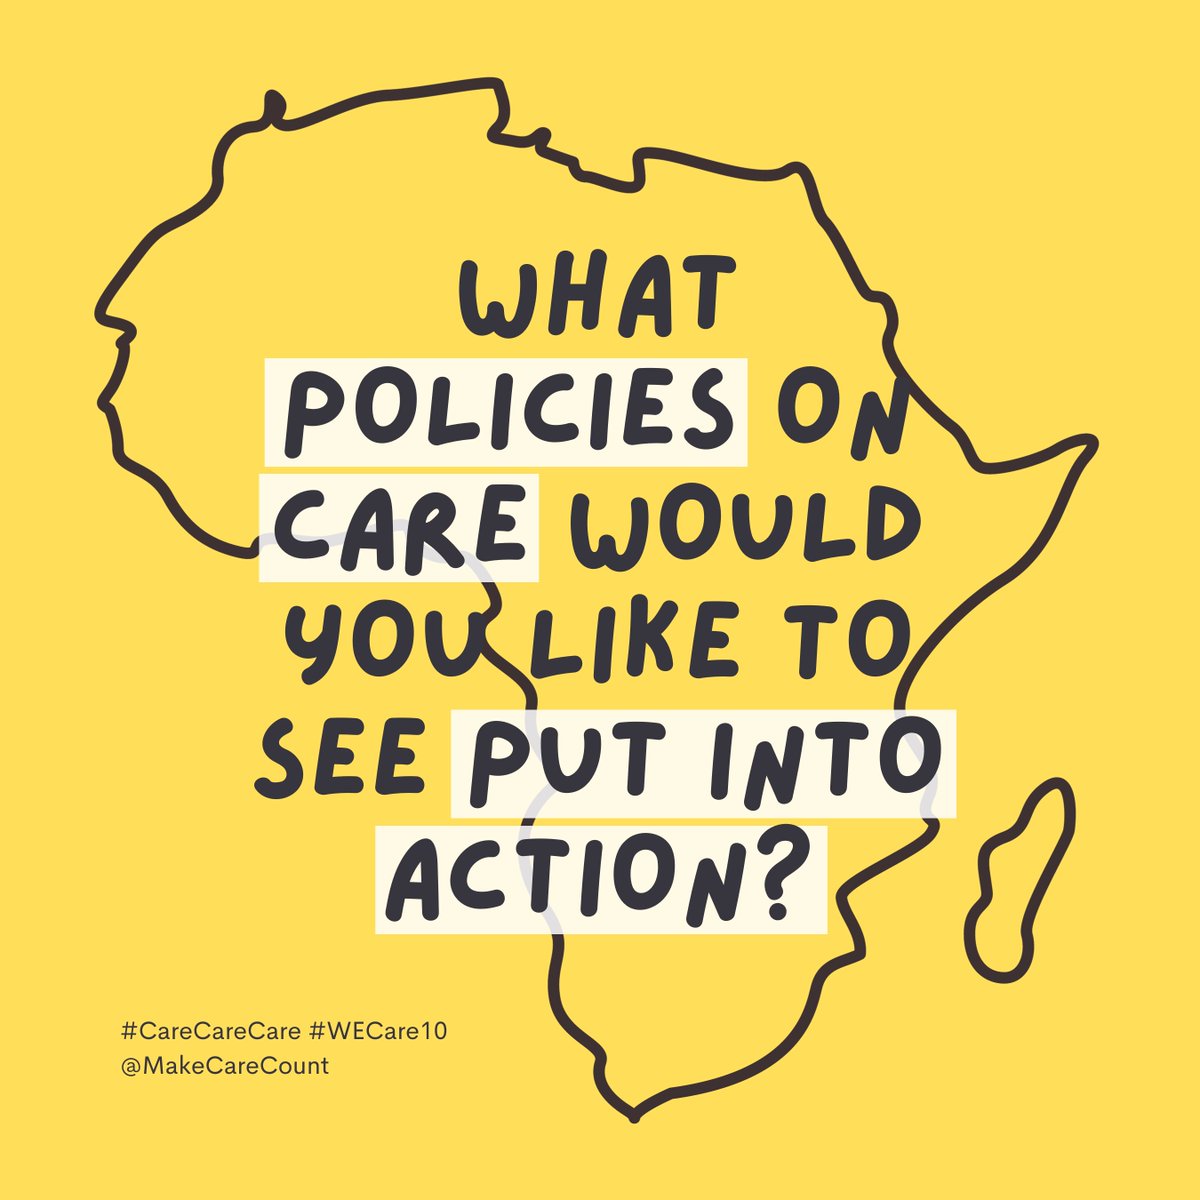 Share your thoughts and let’s create a more equal future together! 

#CareCareCare #WECare10 #InvestInCare #TimeToCare @OxfaminAfrica